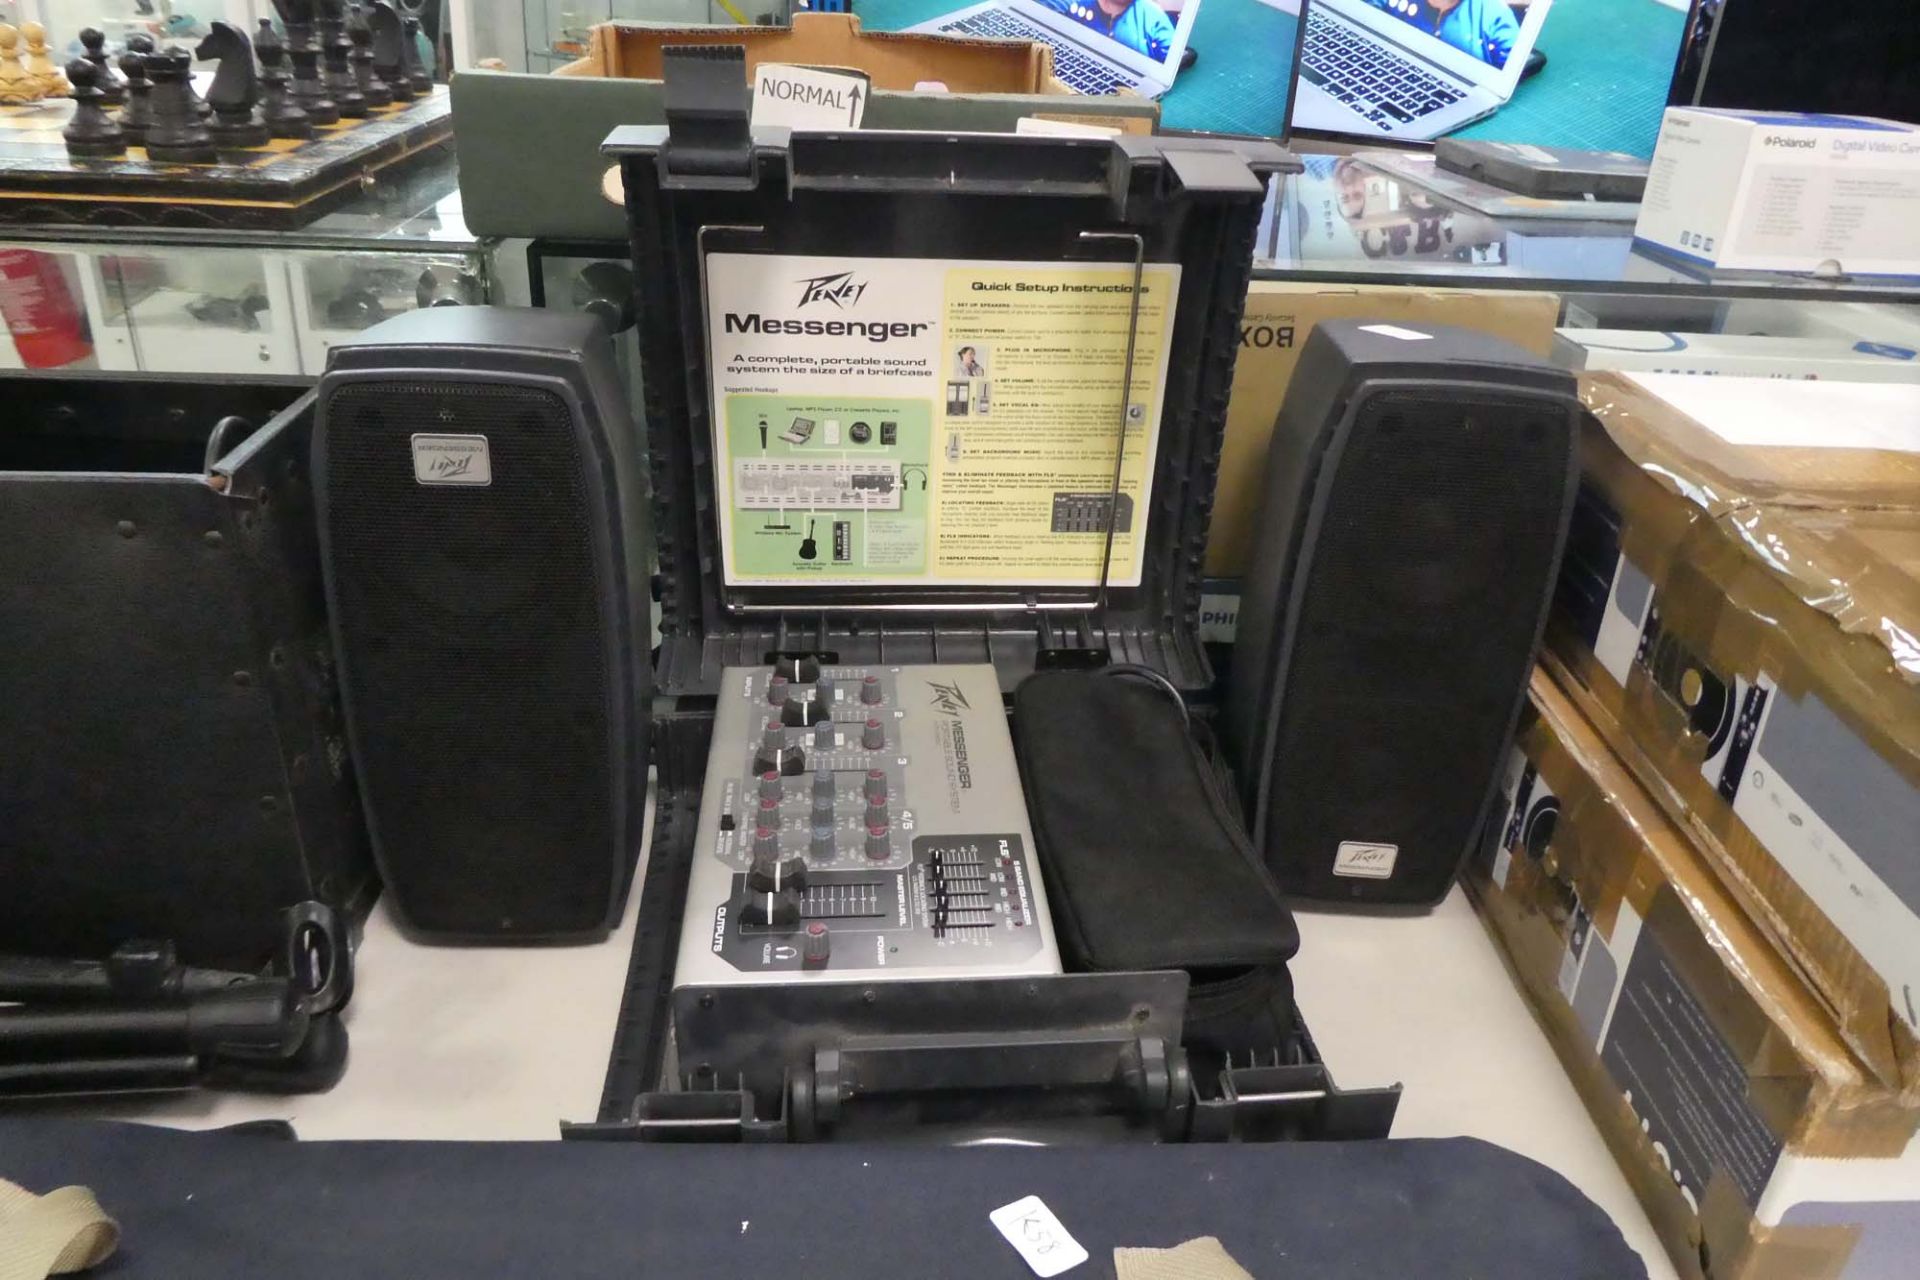 2707 2x Stanton MP3 DJ systems, 2 channel mixers in cases, wireless microphone and receiver, - Image 3 of 3